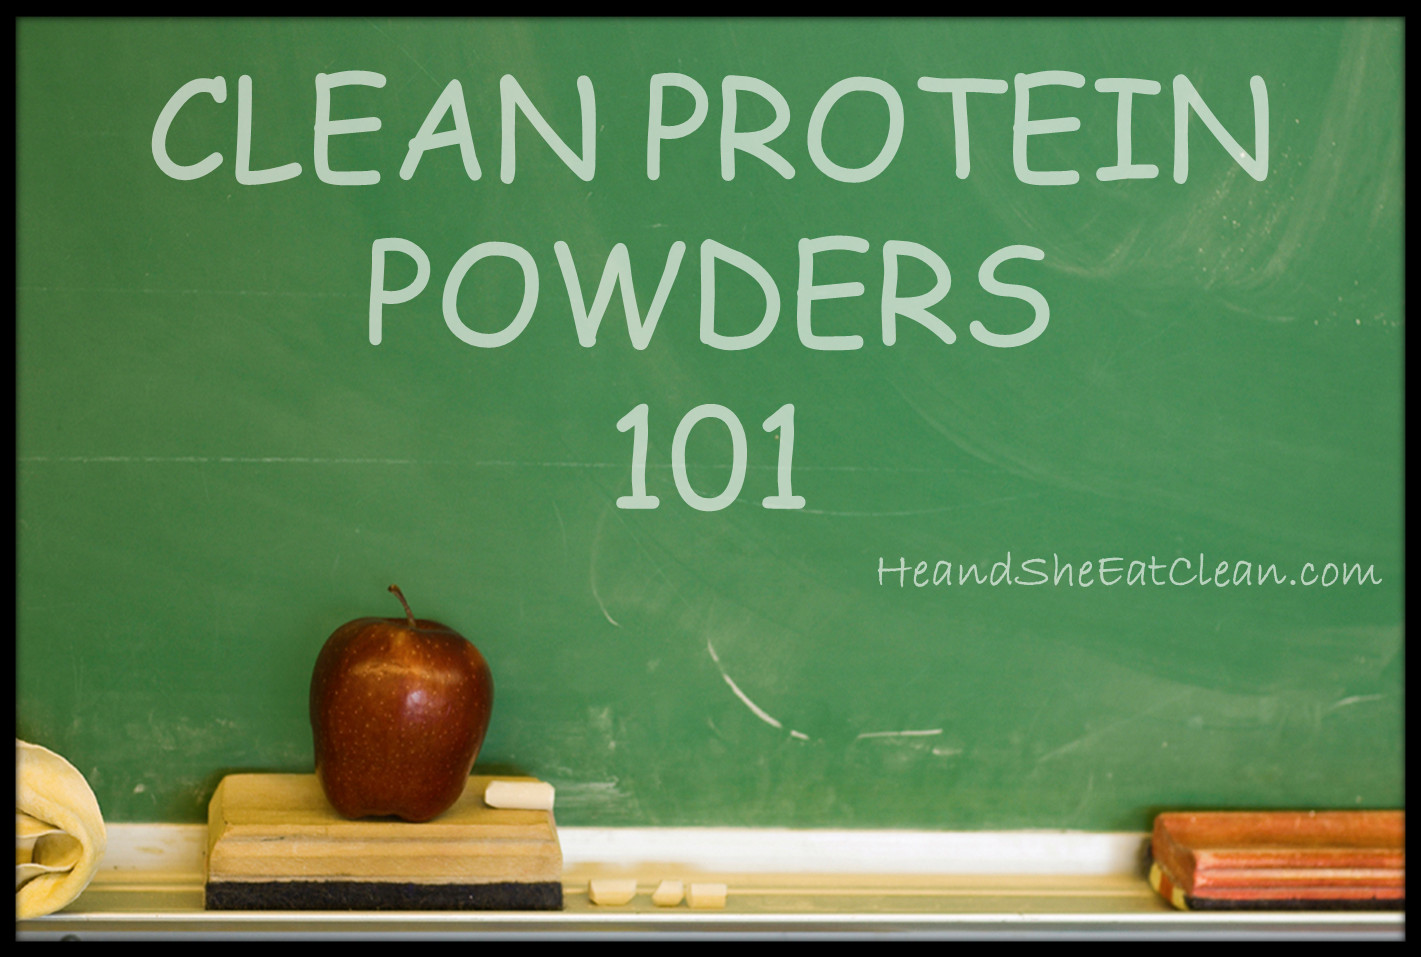 Clean Eating Protein Powder
 Clean Protein Powders 101 He and She Eat Clean